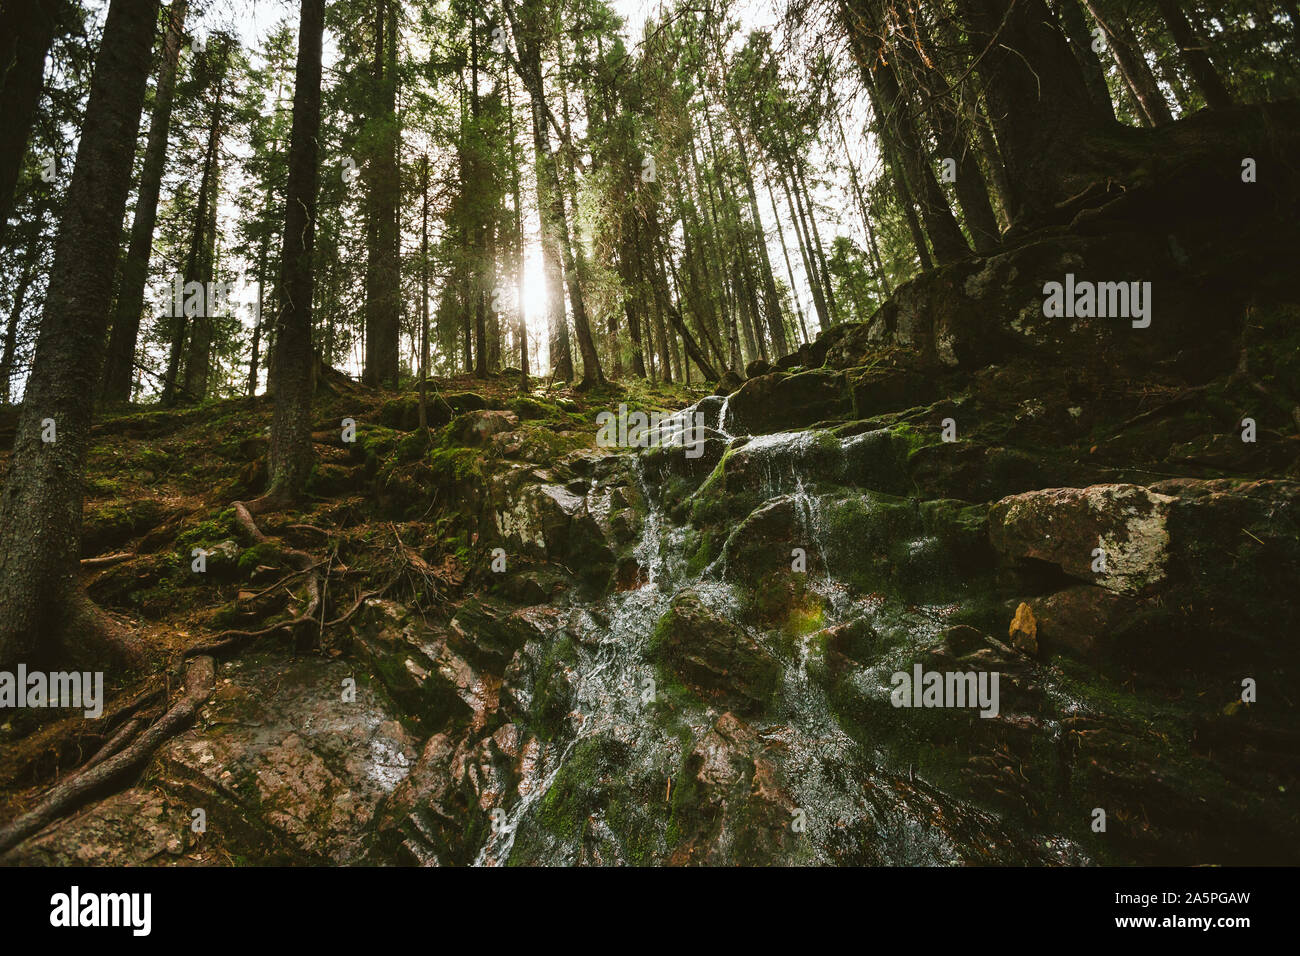 Little waterfall in forest Stock Photo